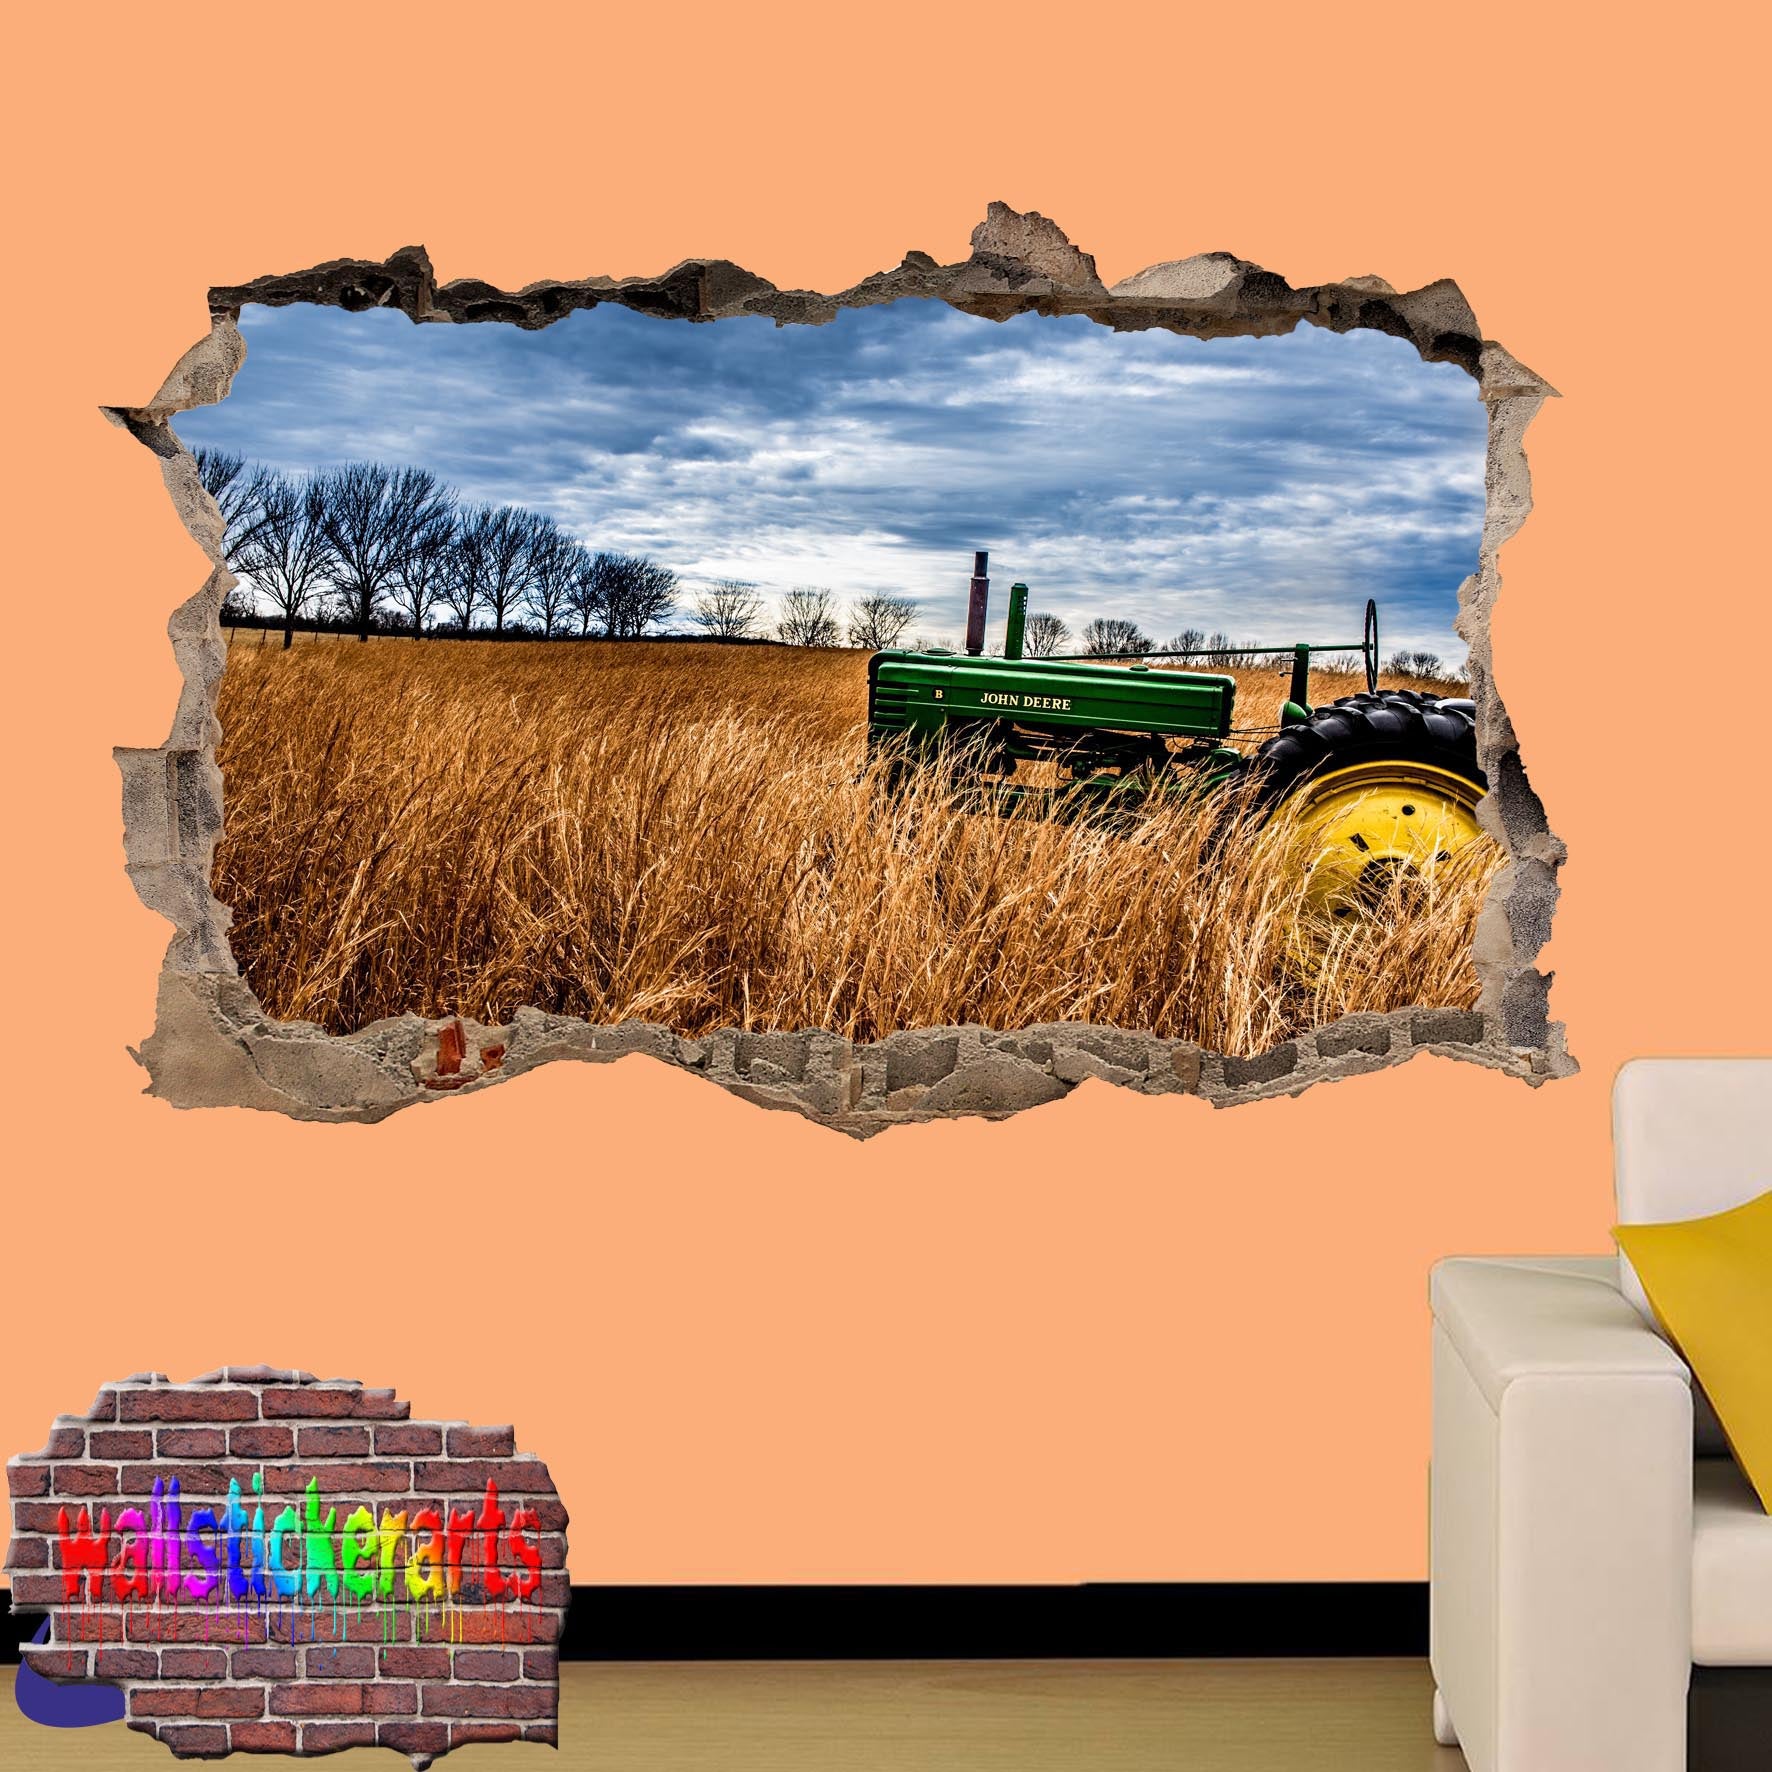 VINTAGE OLD JOHN DEERE TRACTOR AGRICULTURAL FARMING TOOLS POSTER WALL STICKER